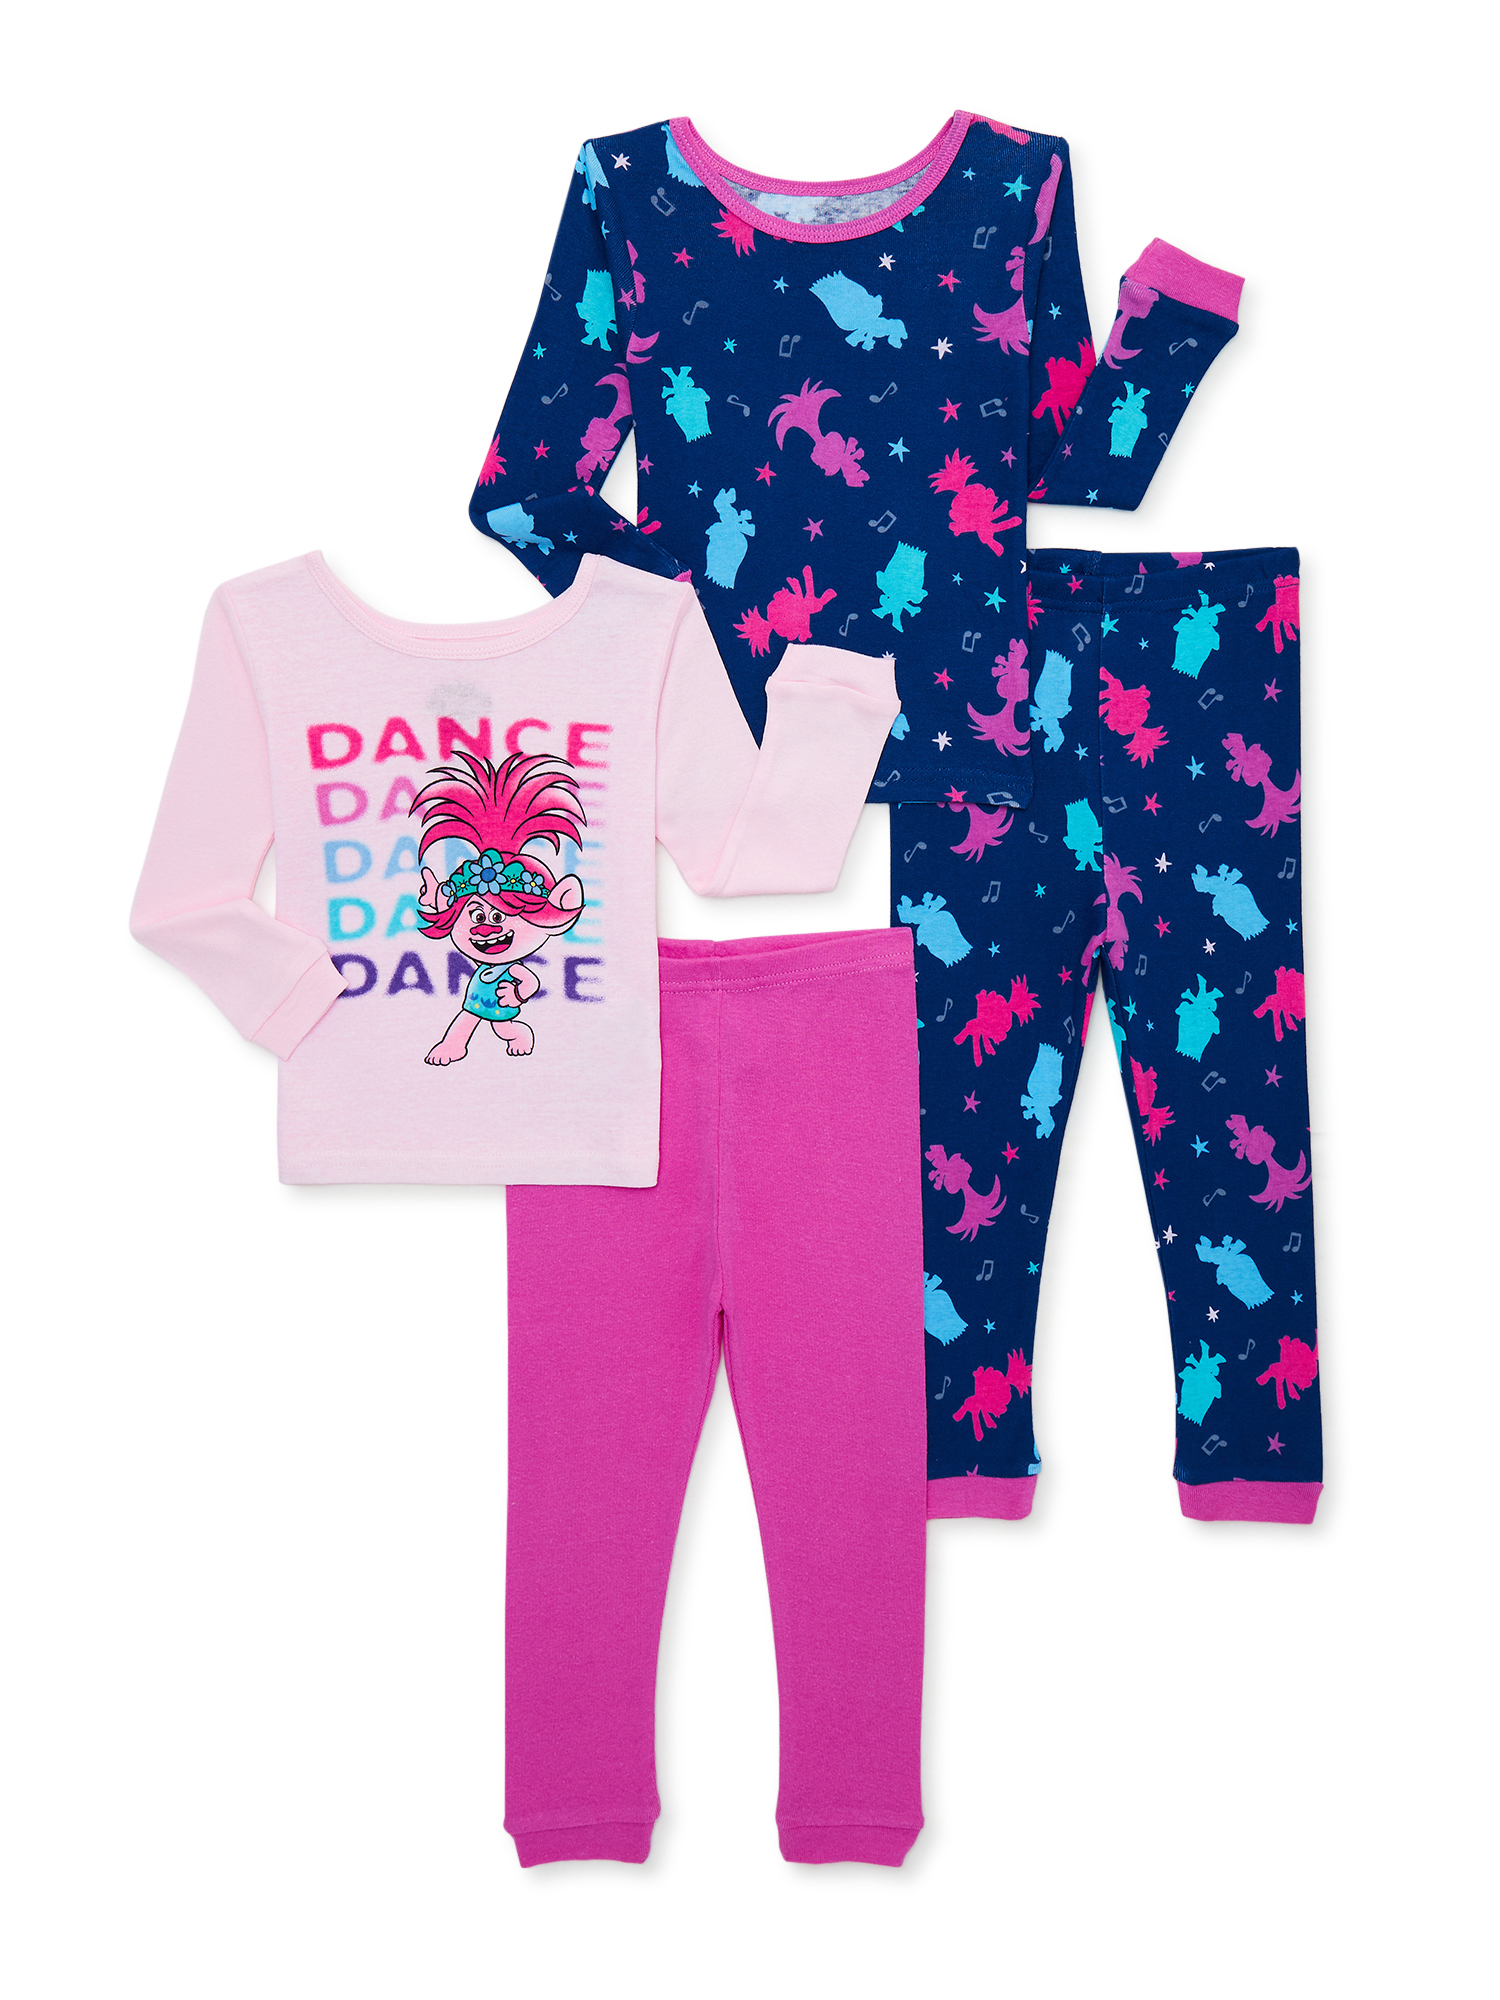 Trolls 2 Toddler Girls Long Sleeve Tops and Pants, 4-Piece Pajama Set, Sizes 2T-4T - image 1 of 4